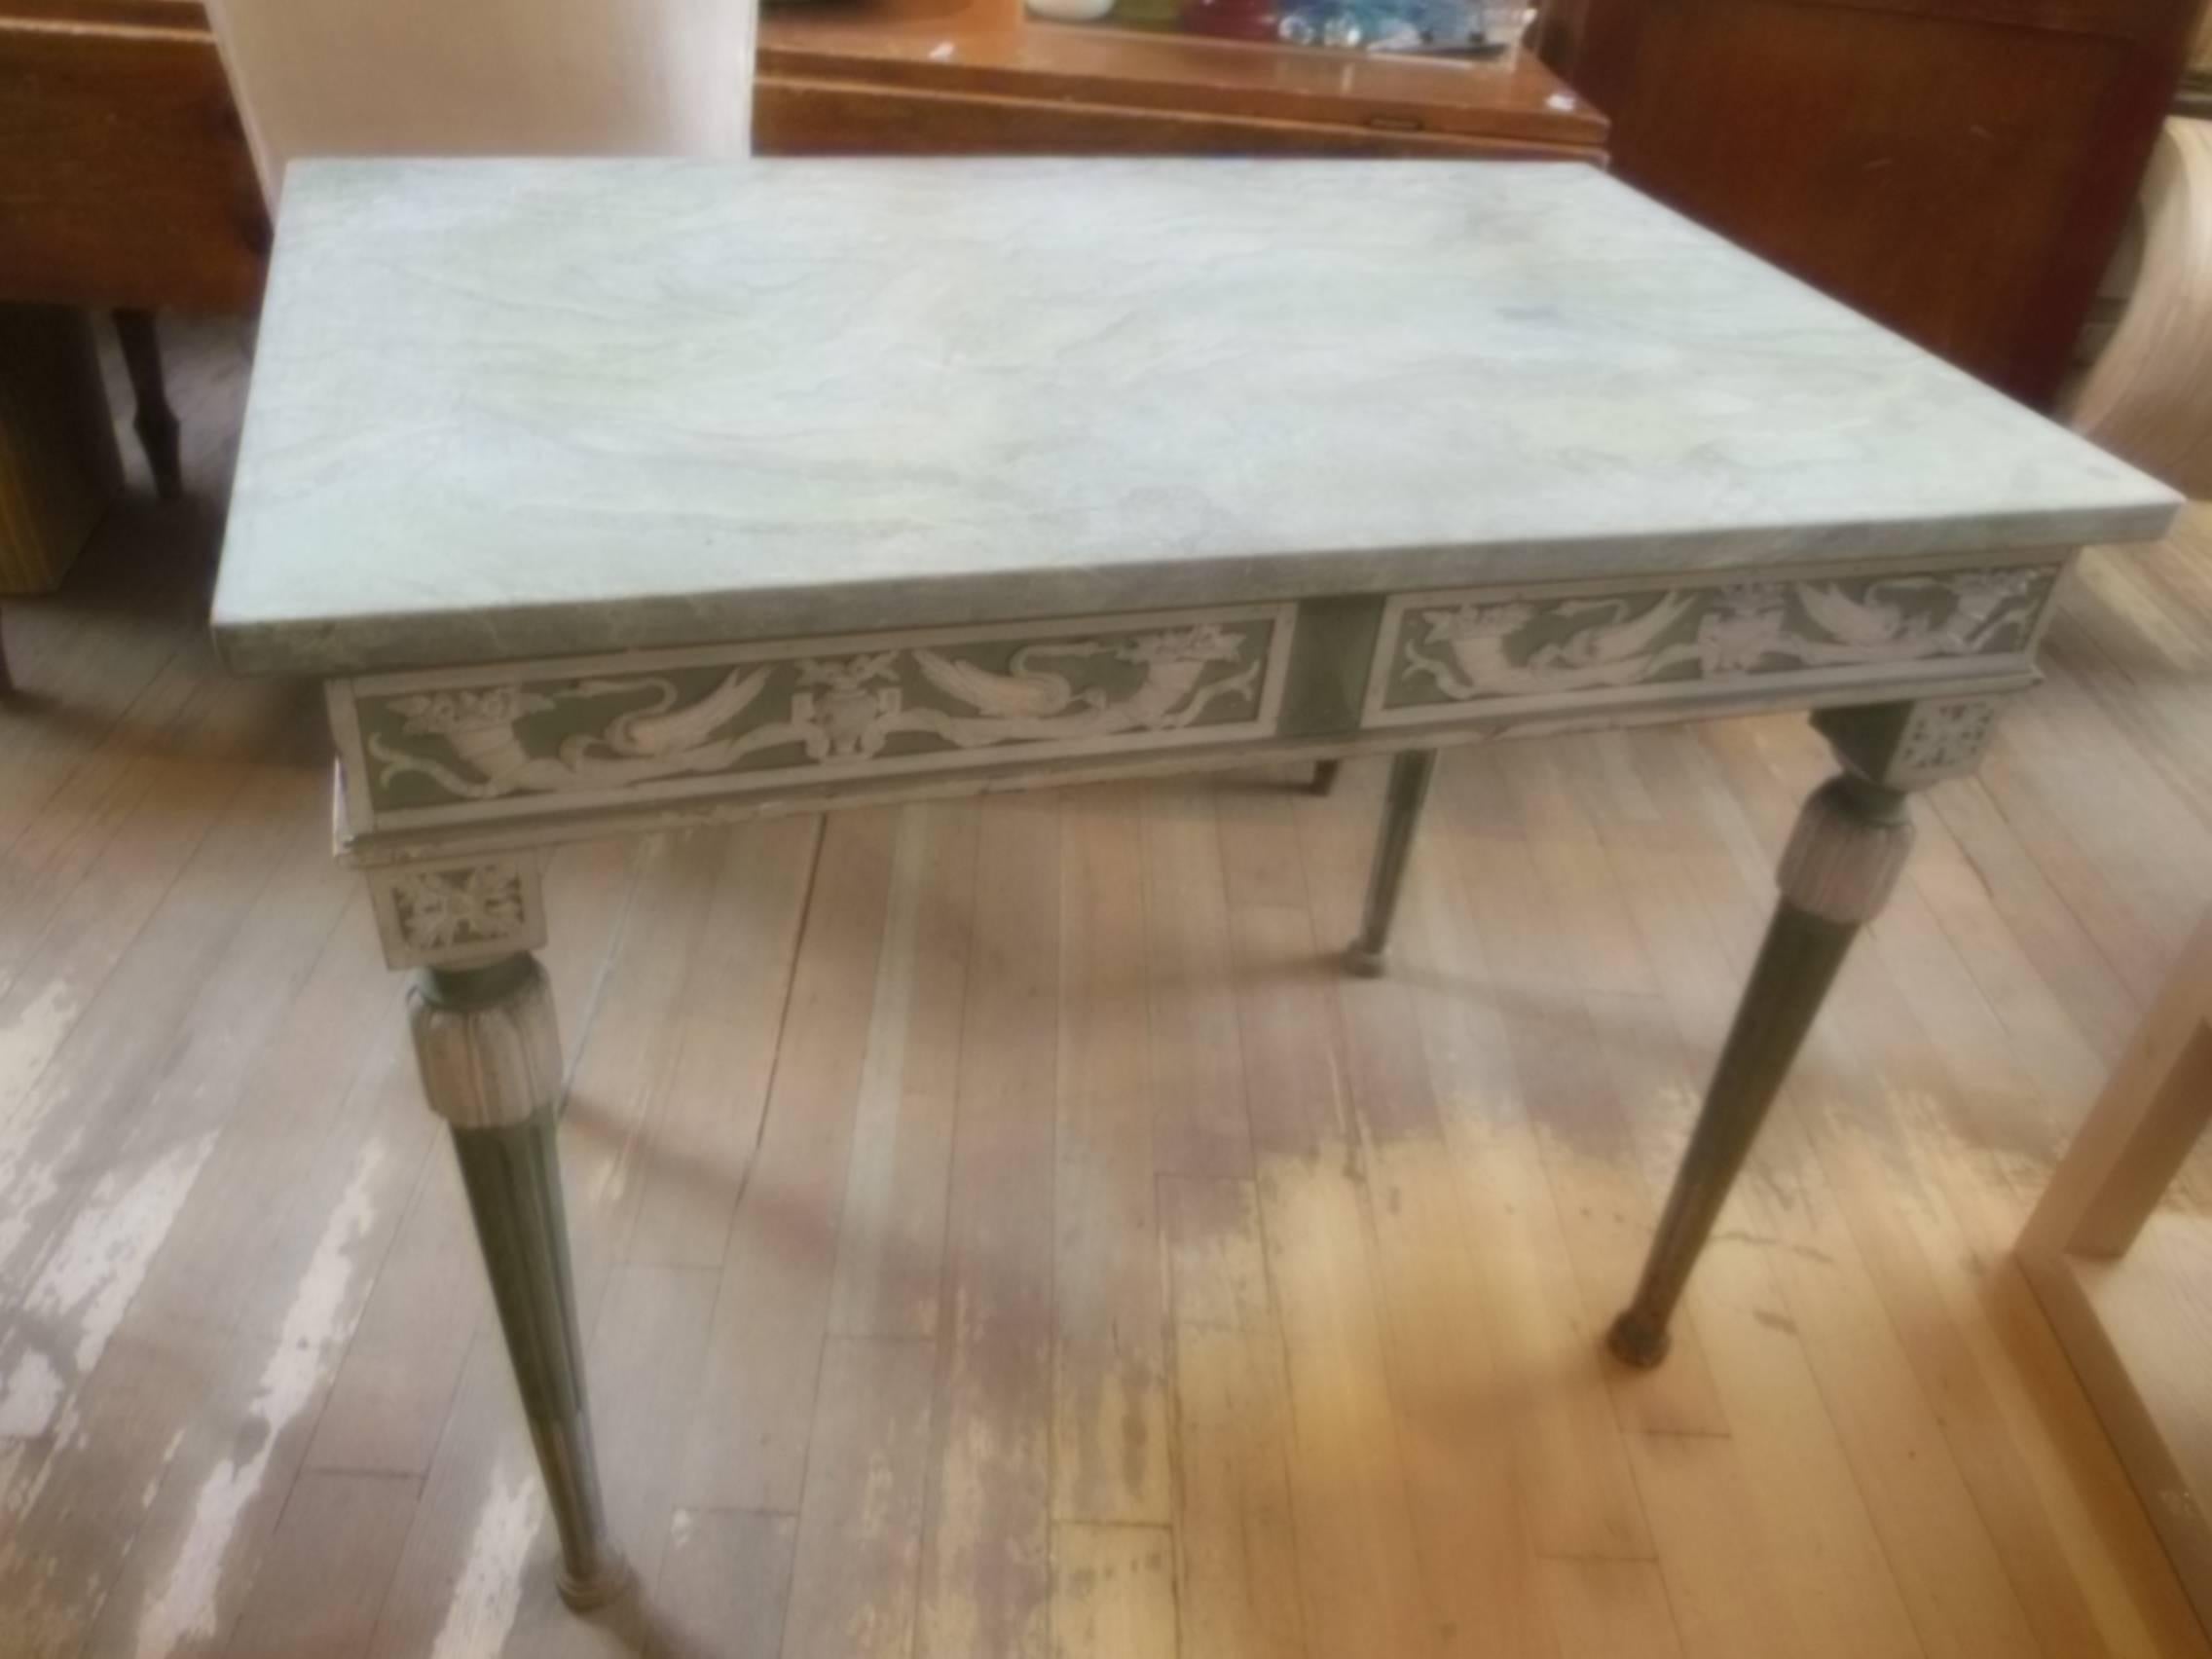 Pretty stone top vintage table with applied decoration